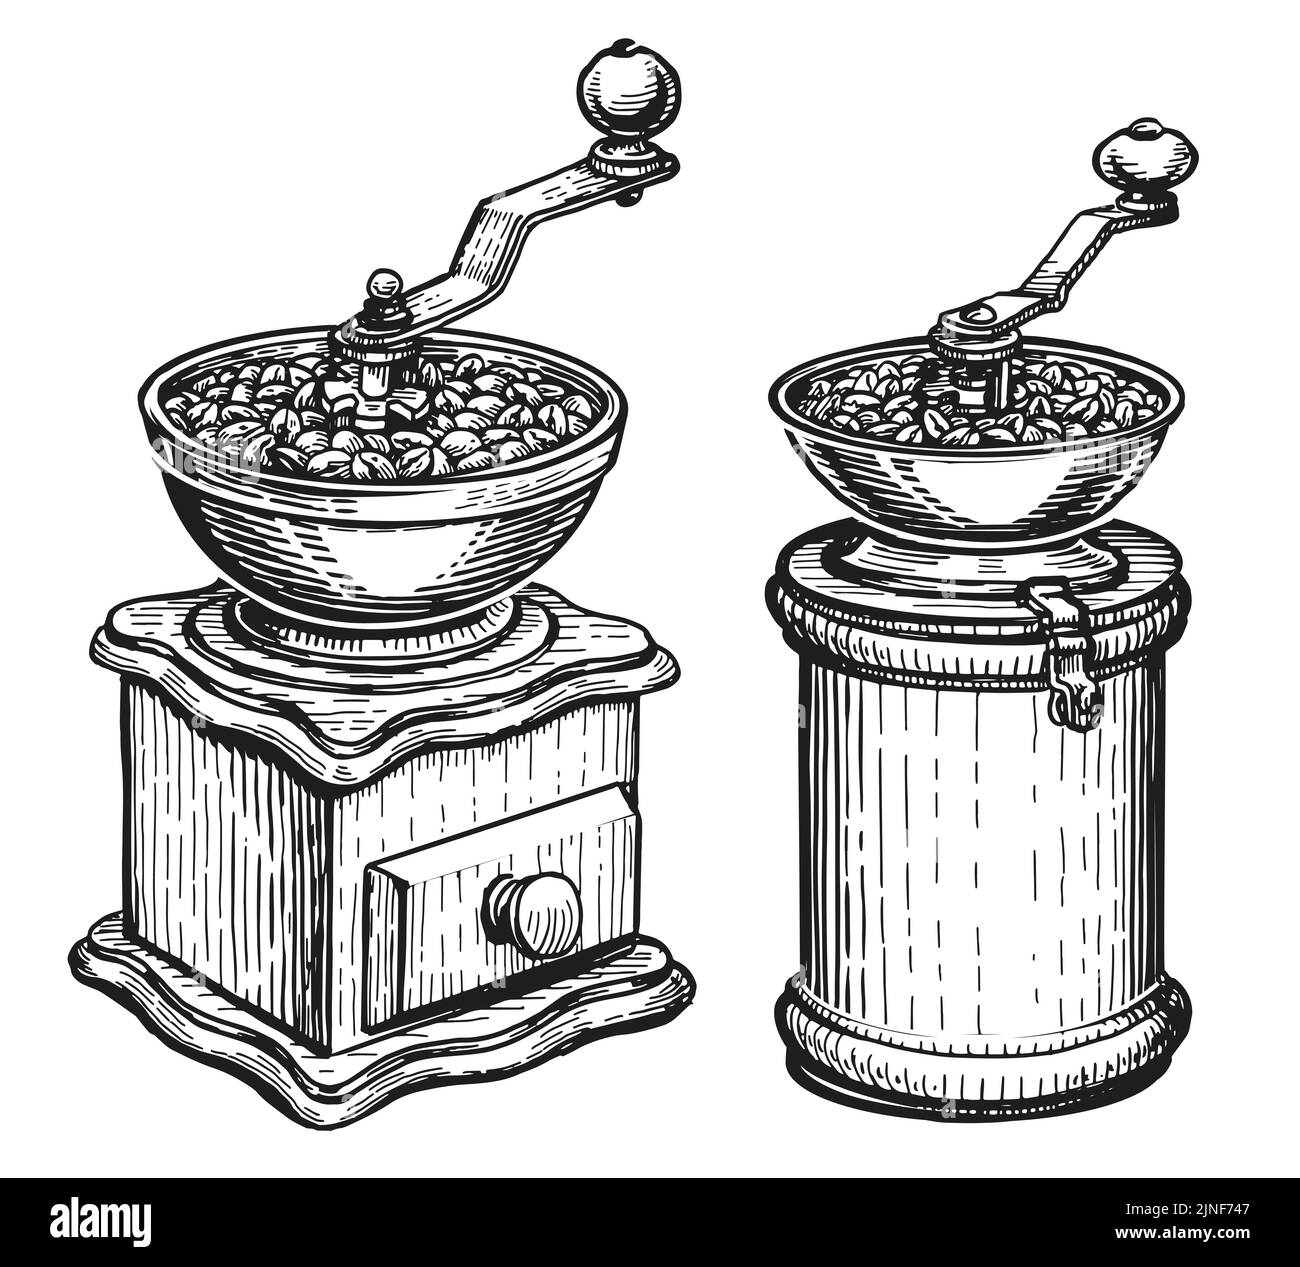 Hand sketch drawing manual coffee grinder set. Coffee shop concept. Illustration isolated in vintage engraving style Stock Photo